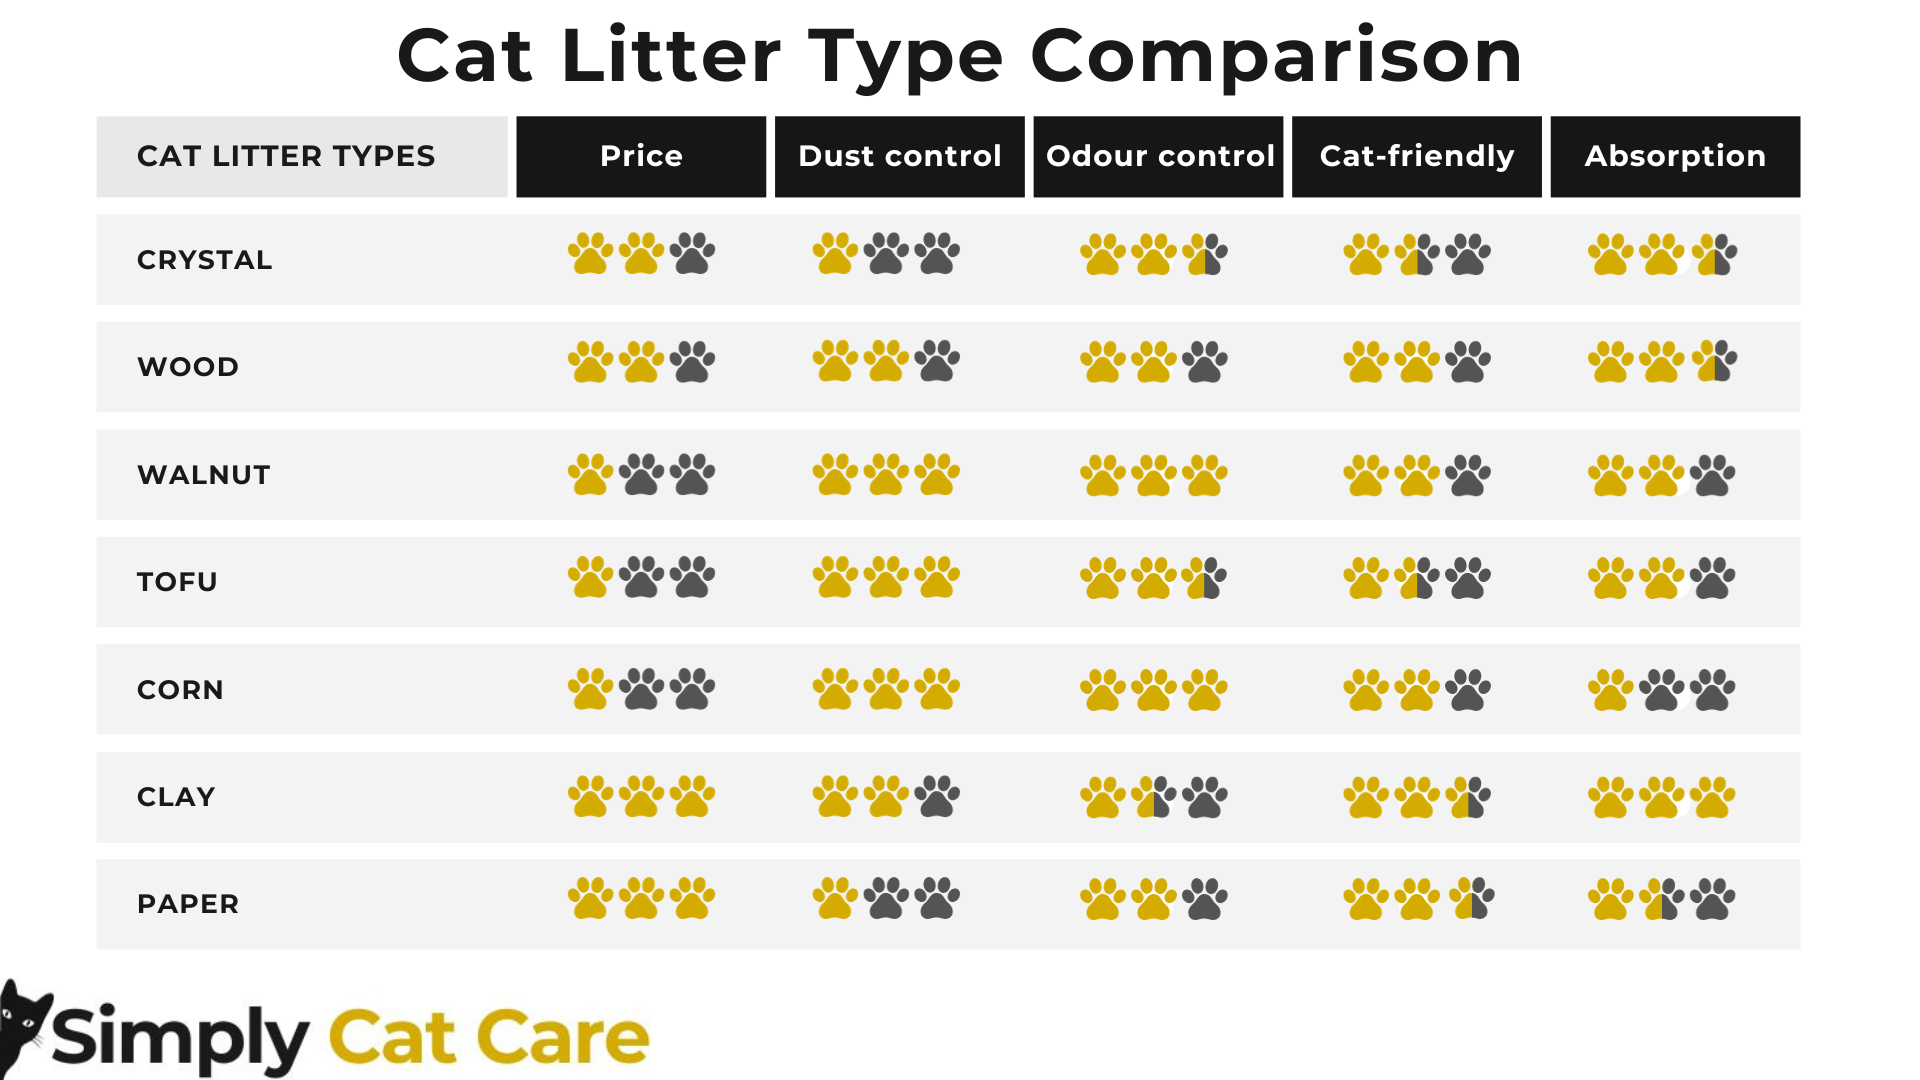 A comparison of different types of cat litter for price, dust control, odour control, cat-friendliness and absorption.